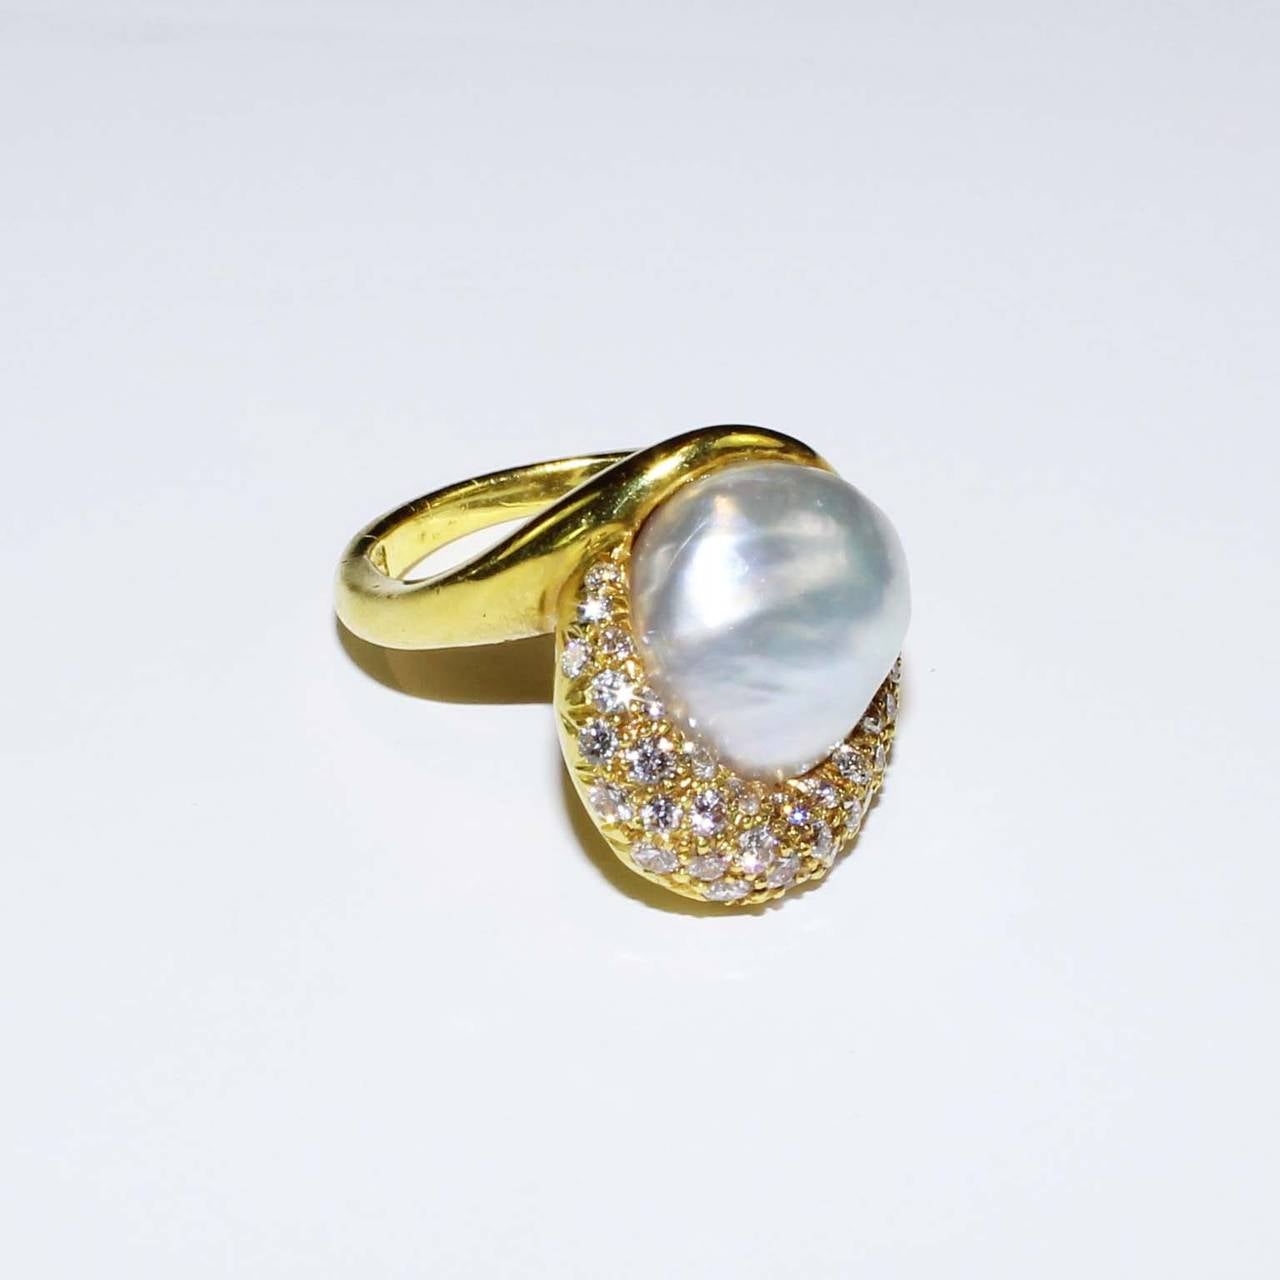 Henry Dunay, 18K yellow gold ring set with one natural pearl and pave set with 37 full cut round diamonds, weighing .75cts, Pearl measures 13mmx 12.5mm. Finger size 7.5, may be sized.